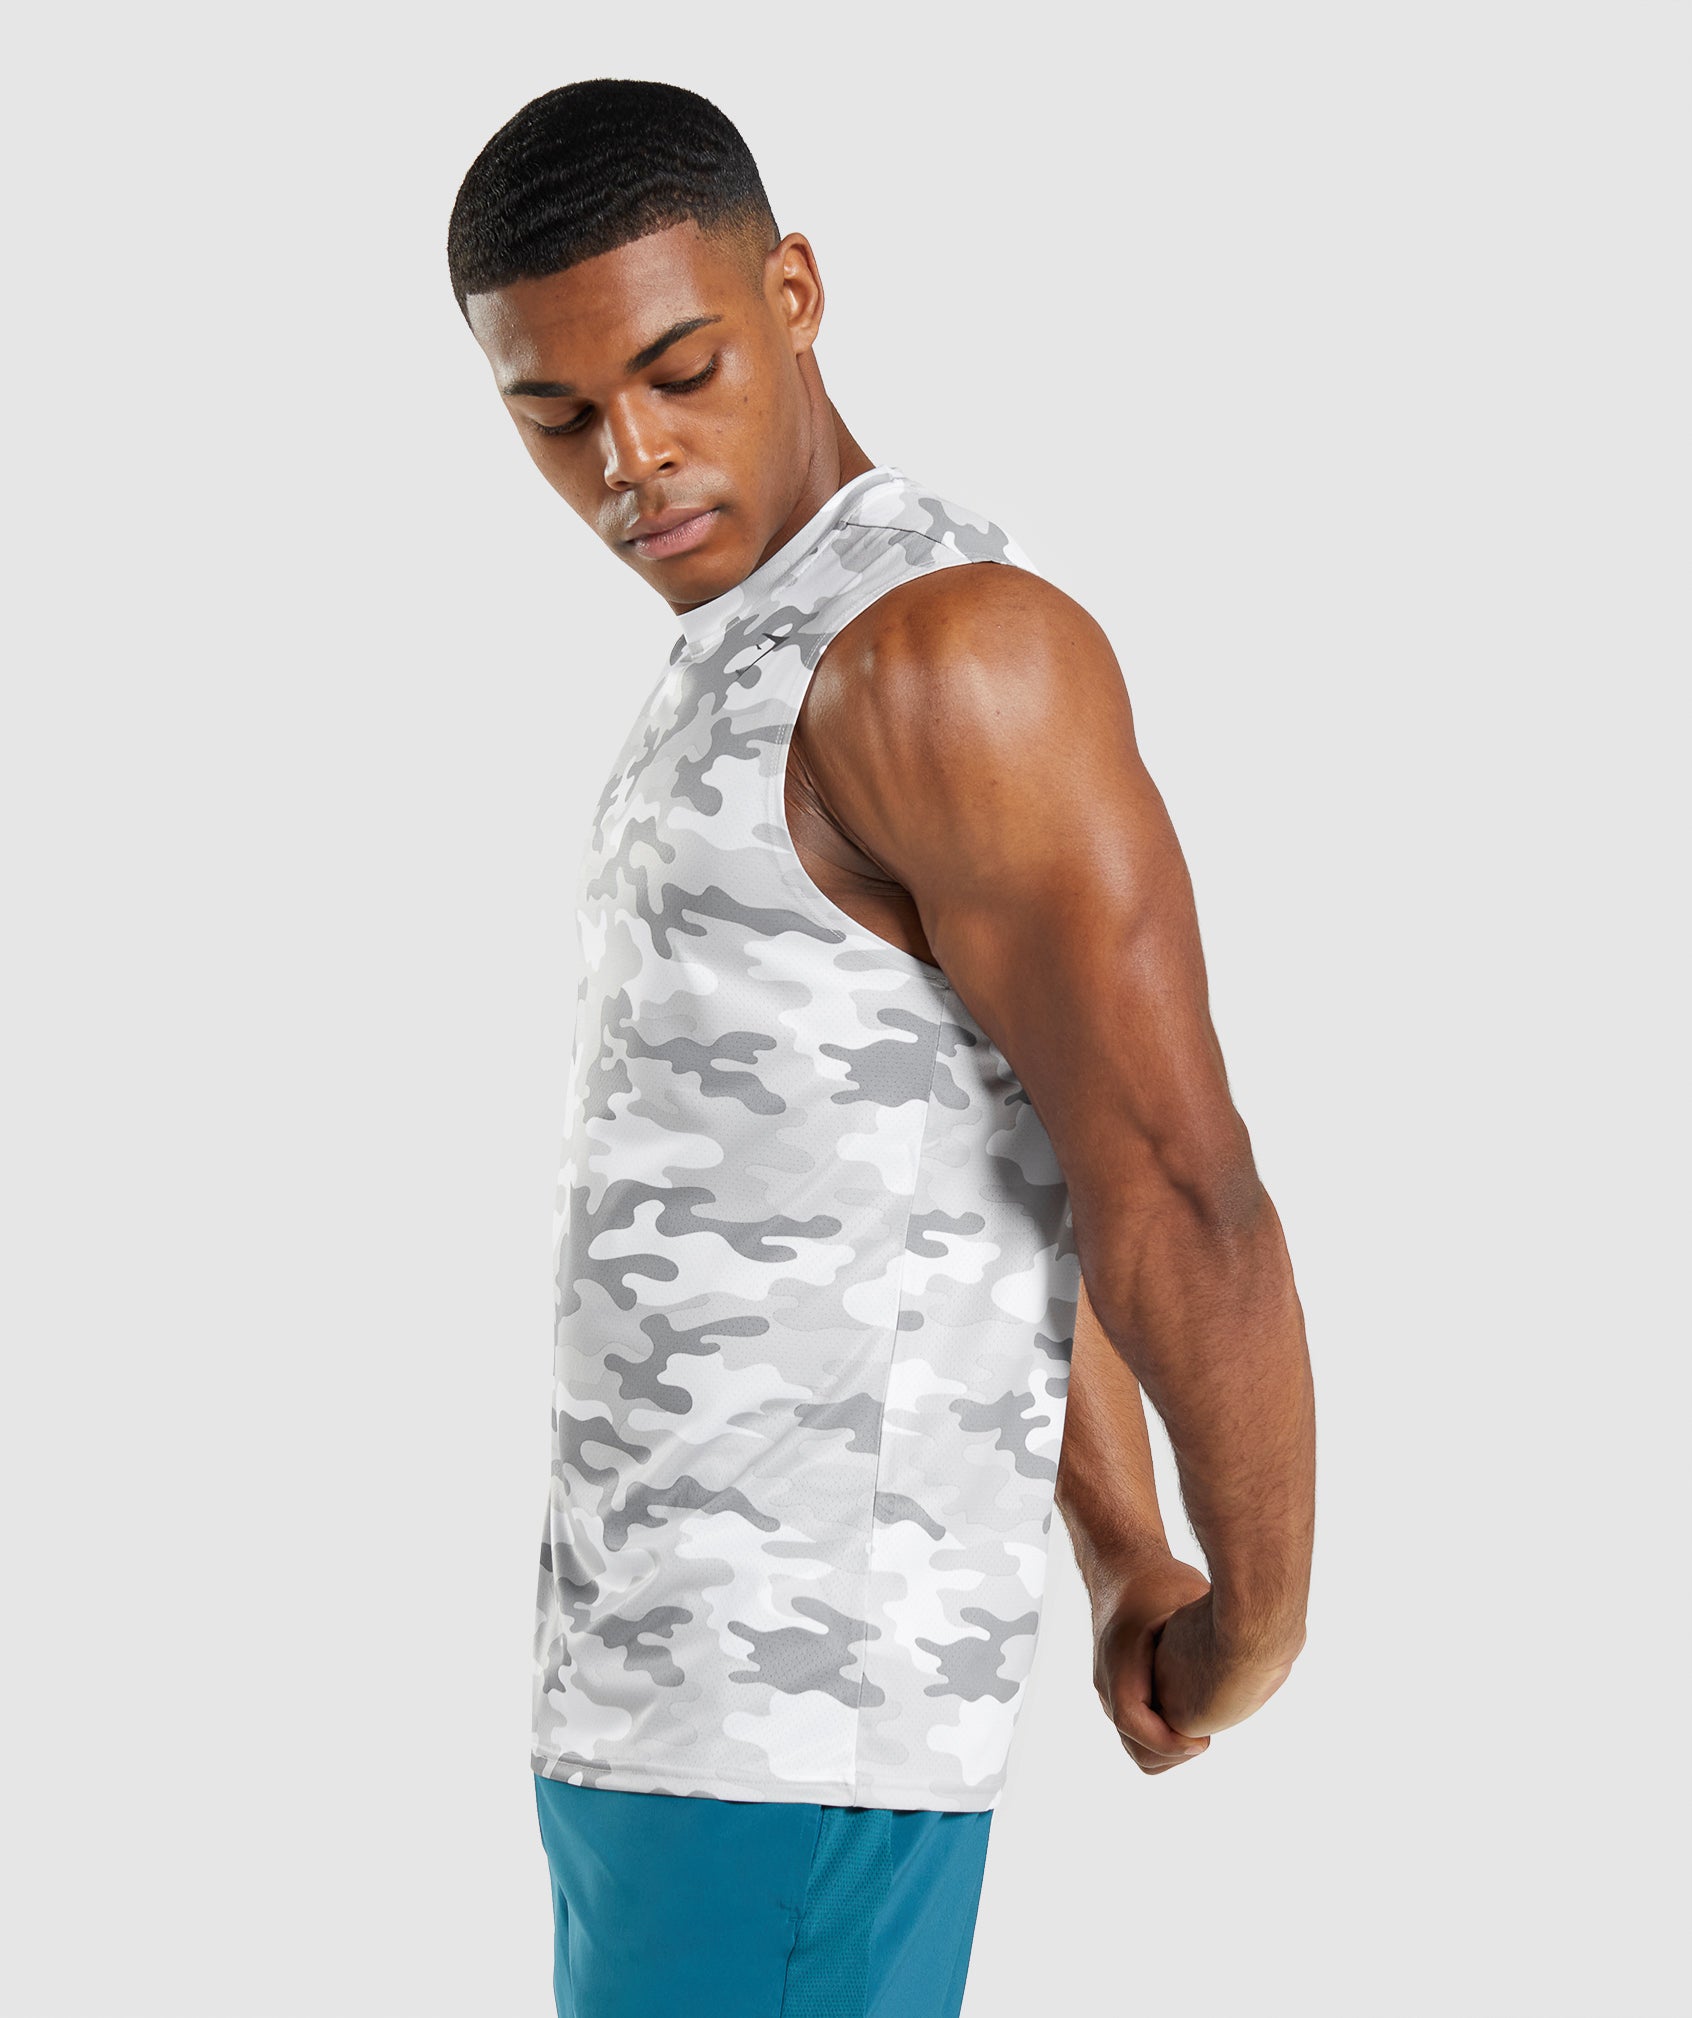 Arrival Sleeveless T-Shirt in Light Grey Print - view 2